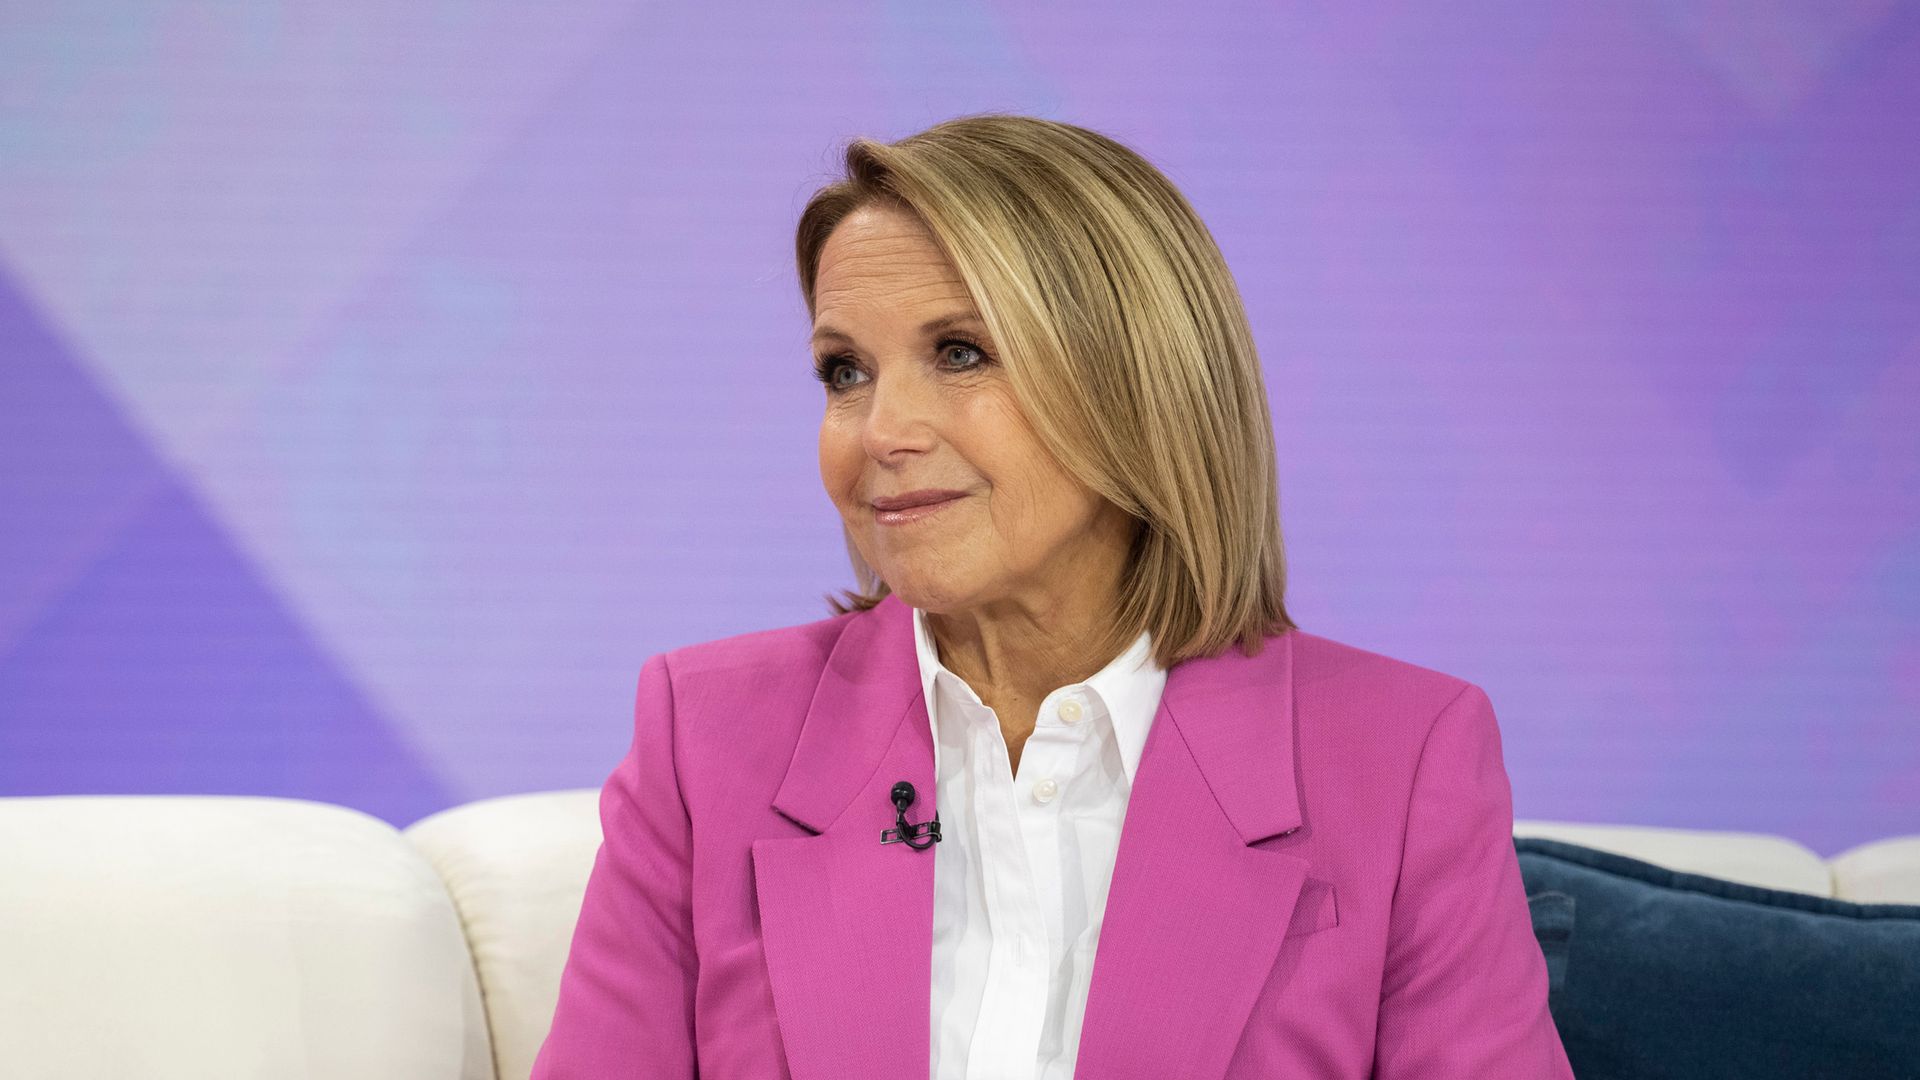 Katie Couric on the Today Show onMonday, October 3, 2022